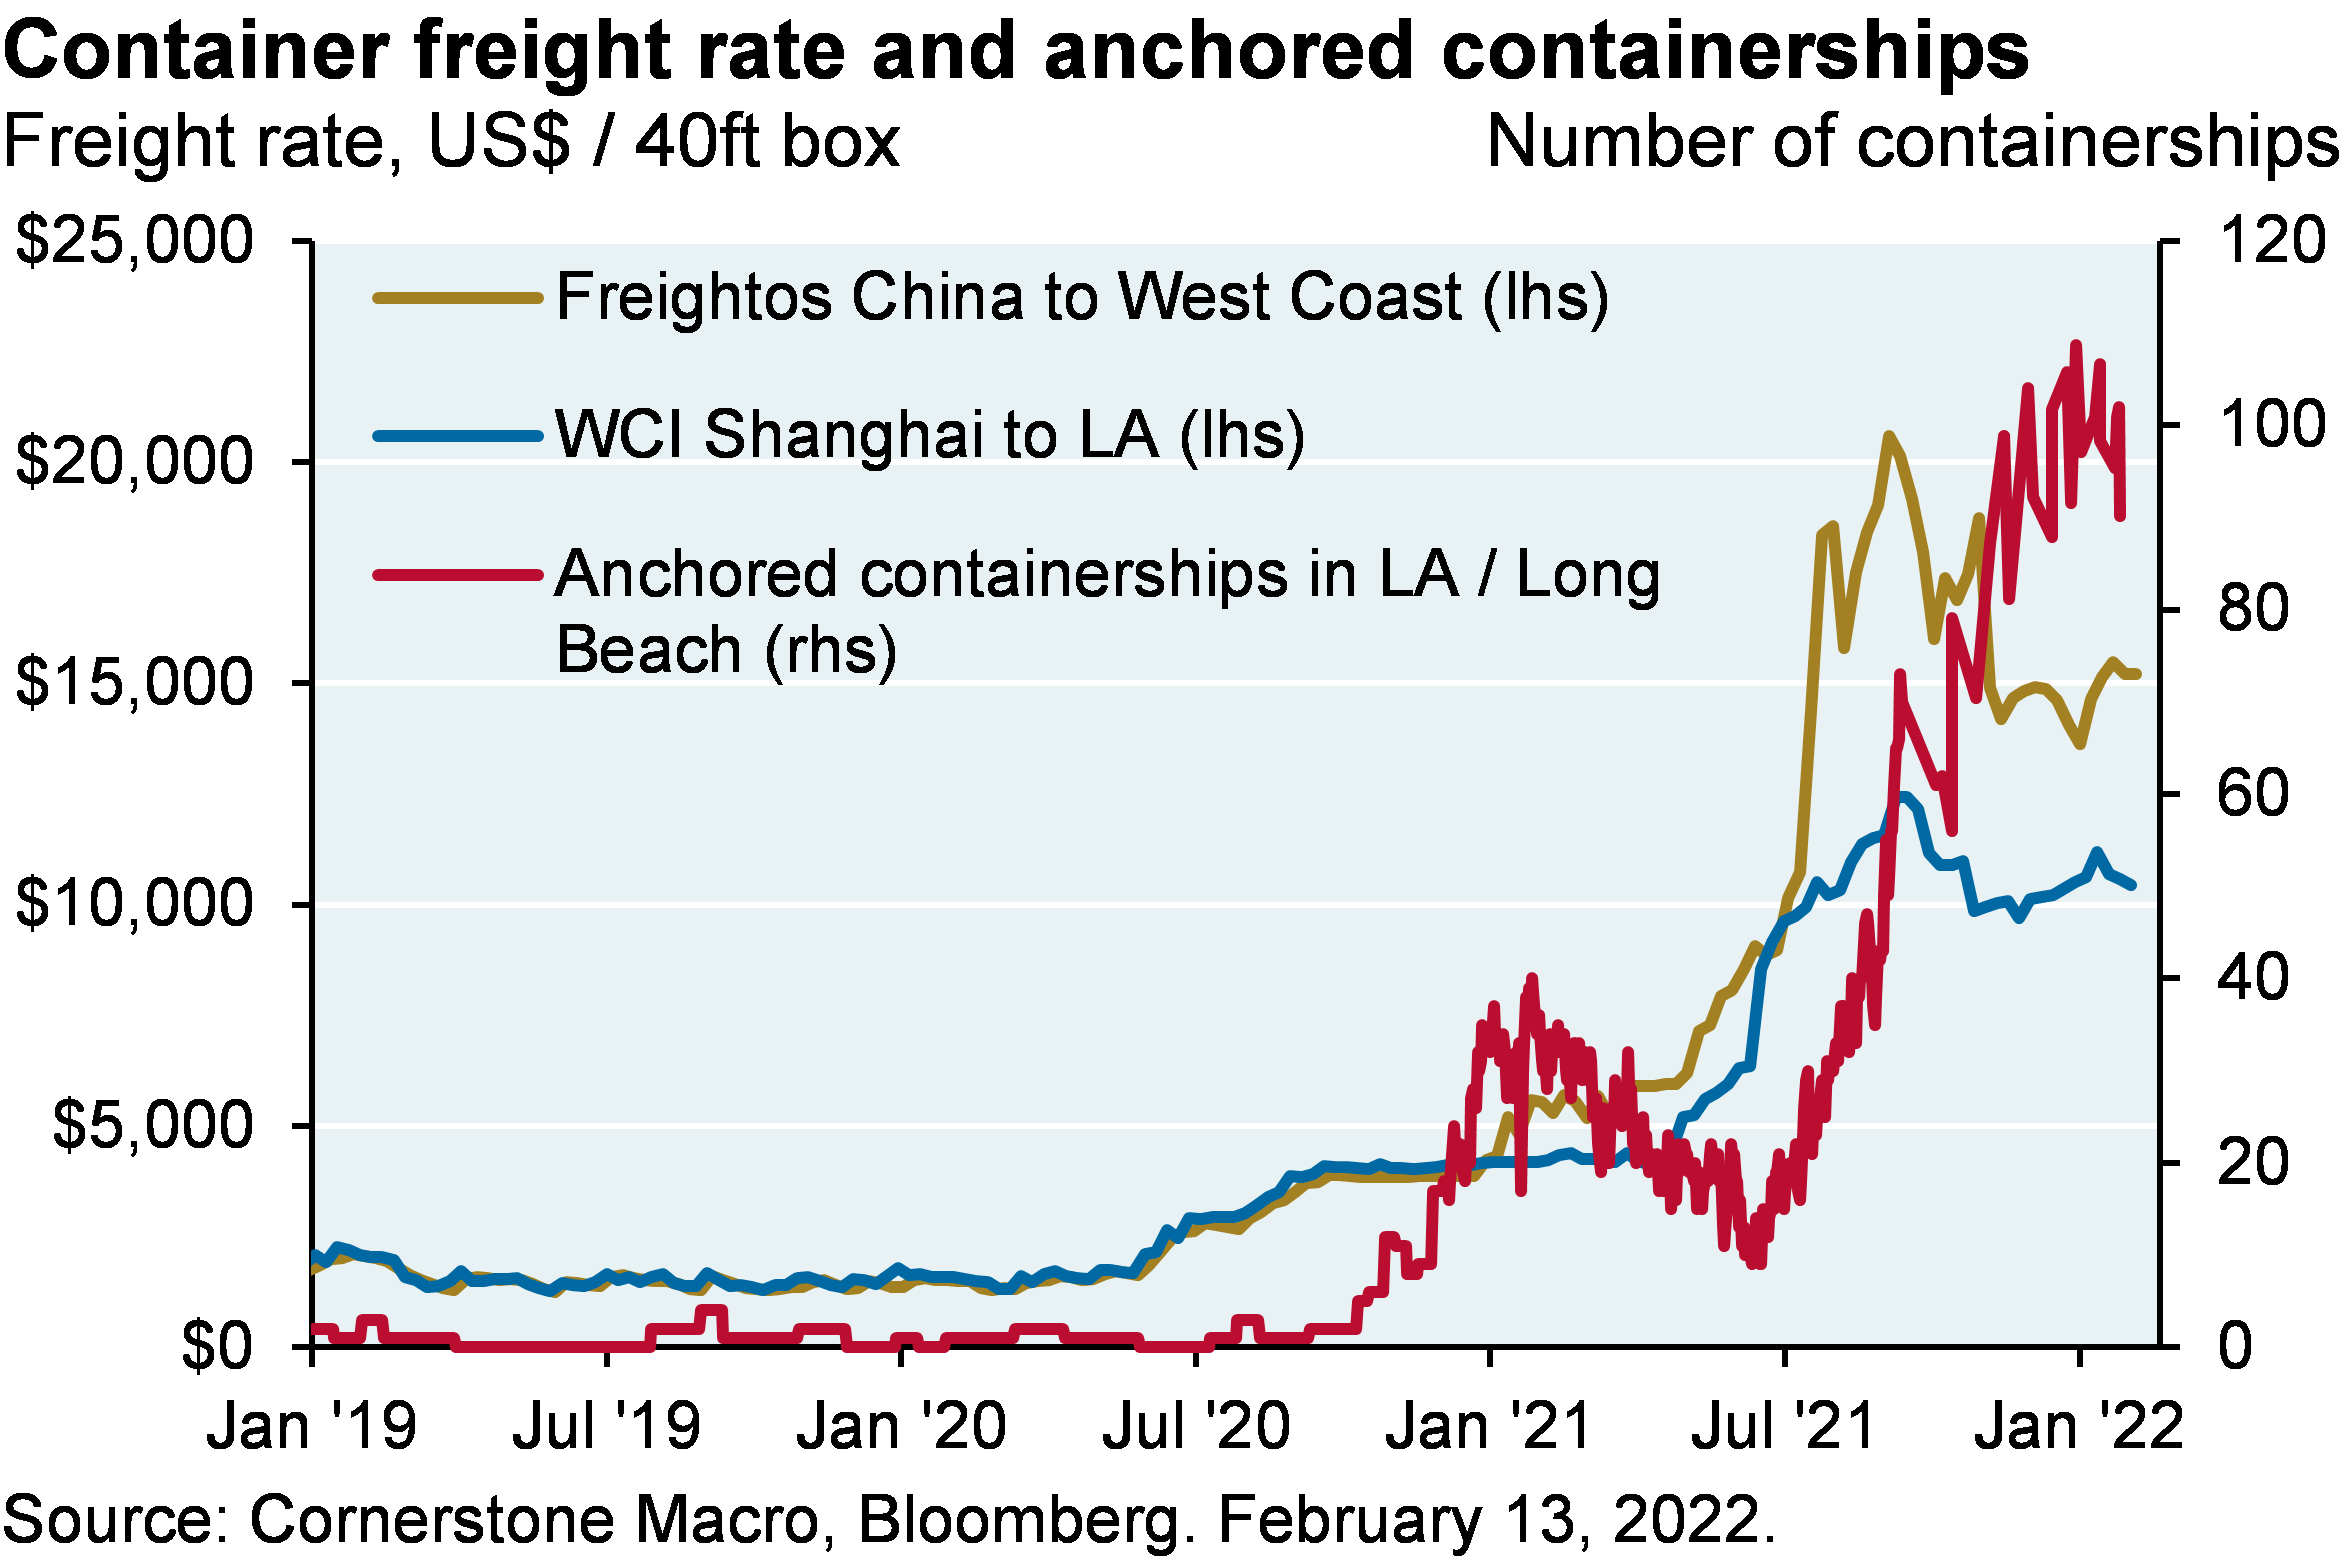 Line chart shows the container freight rate from China to LA/West Coast shown in US$ per 40ft box and anchored containerships since January 2019. While the freight rate remained around $2,000 per 40ft box in 2019 and early 2020, in late 2020 the freight rate began increasing. The Freightos China to West Coast freight rate steadily increased to just over $20,000 per 40ft box, though it has recently declined to around $15,000. The WCI Shanghai to LA index increased to its latest value of around $10,000. Anchored containerships have also steadily increased from historically low levels, with around 90 containerships anchored at the latest point in February.